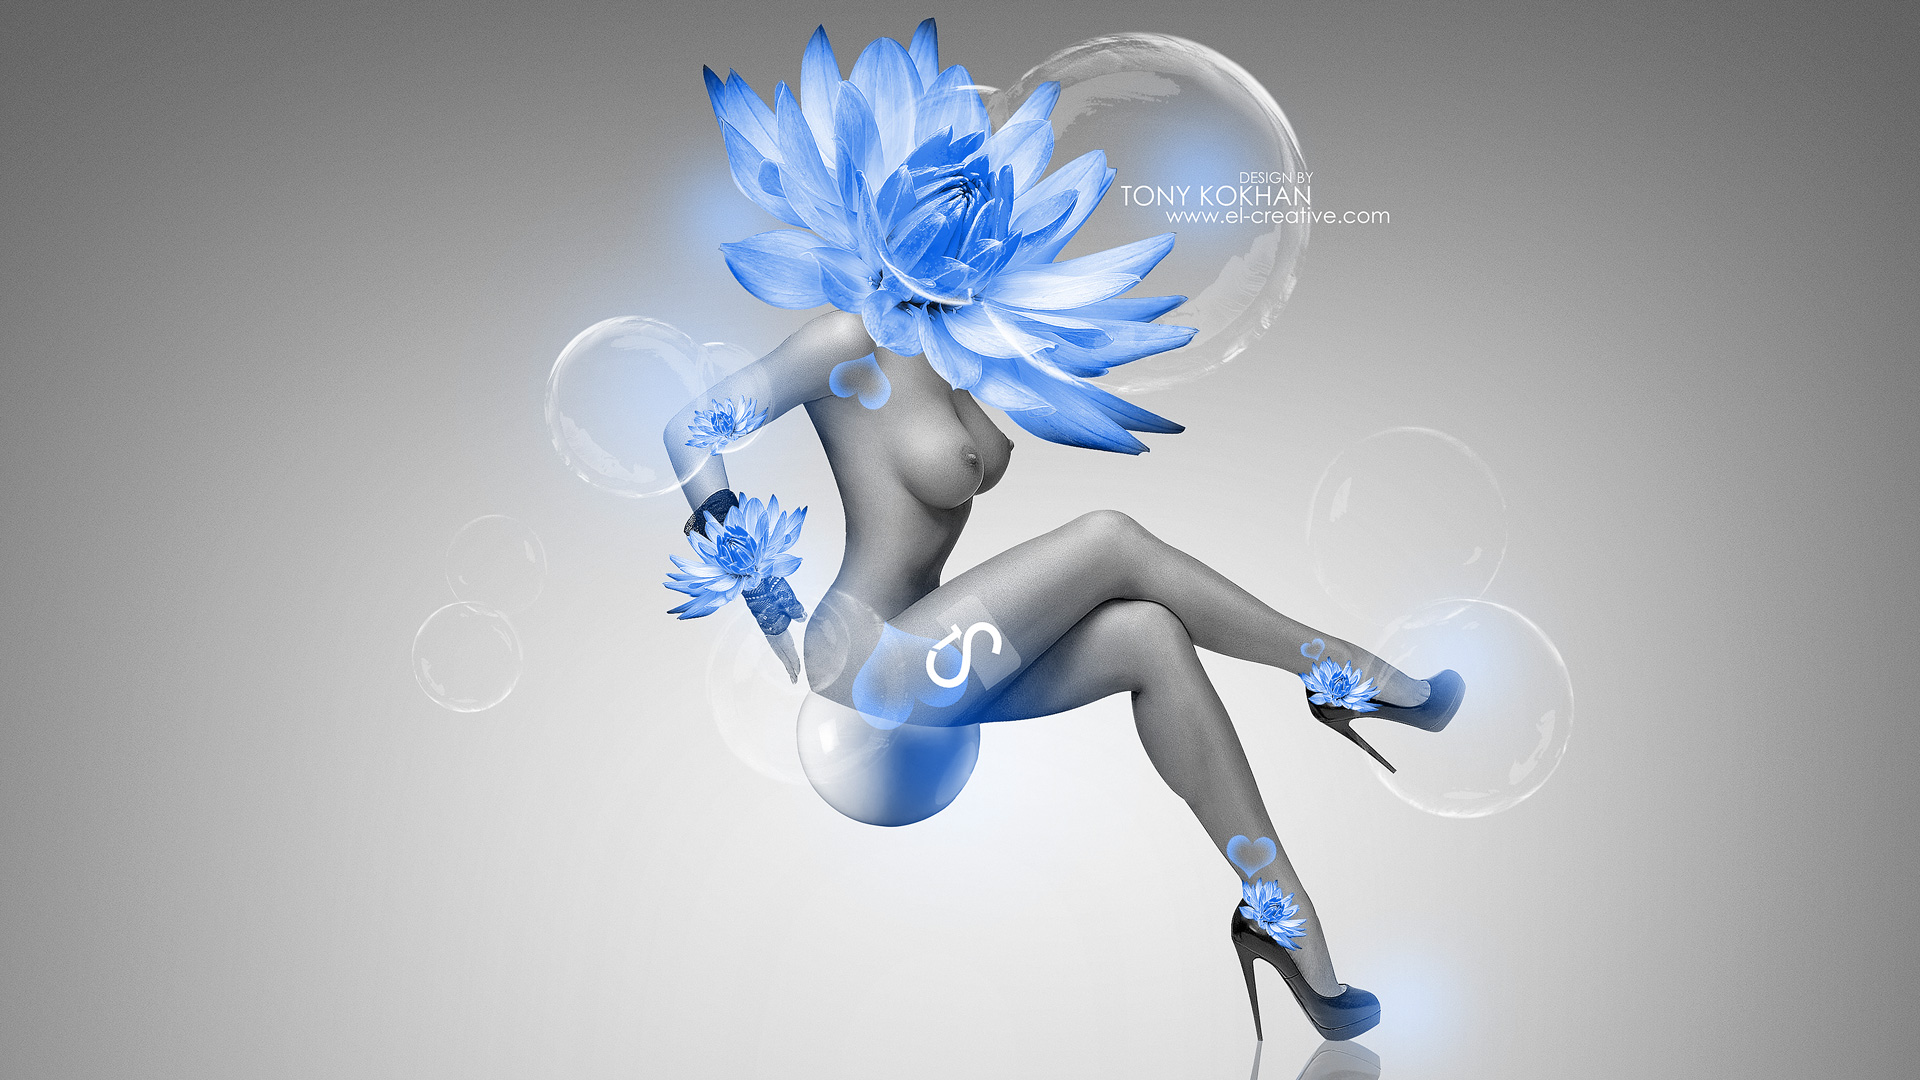  up v1 girl flowers blue neon 2013 hd wallpapers by tony Car Pictures